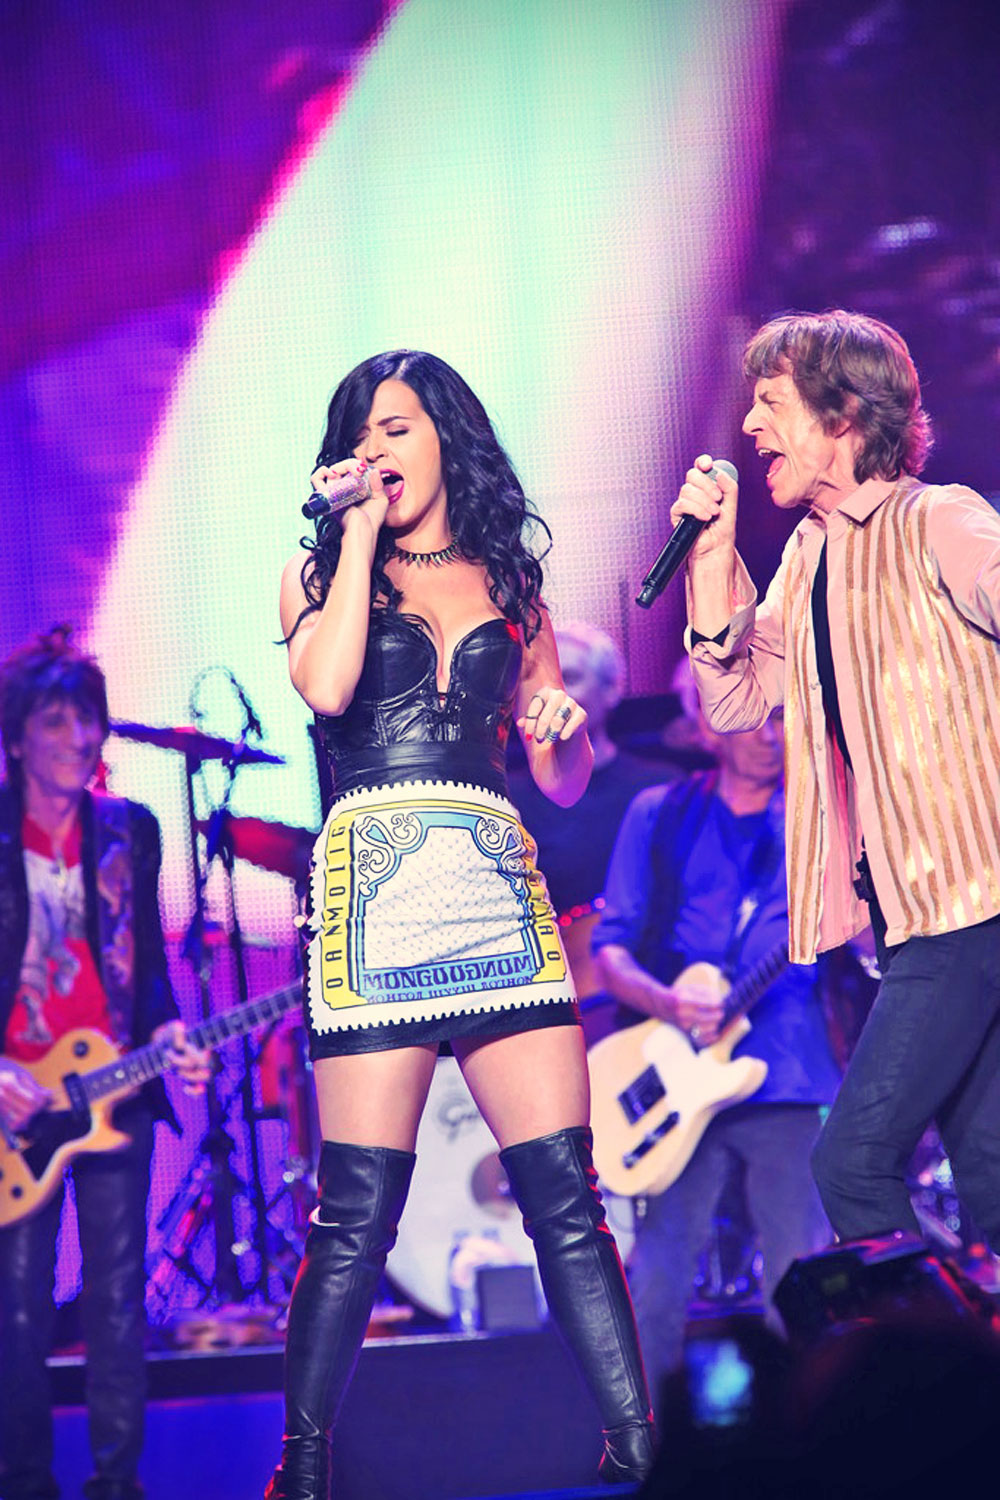 Katy Perry performing on stage whith the Rolling Stones